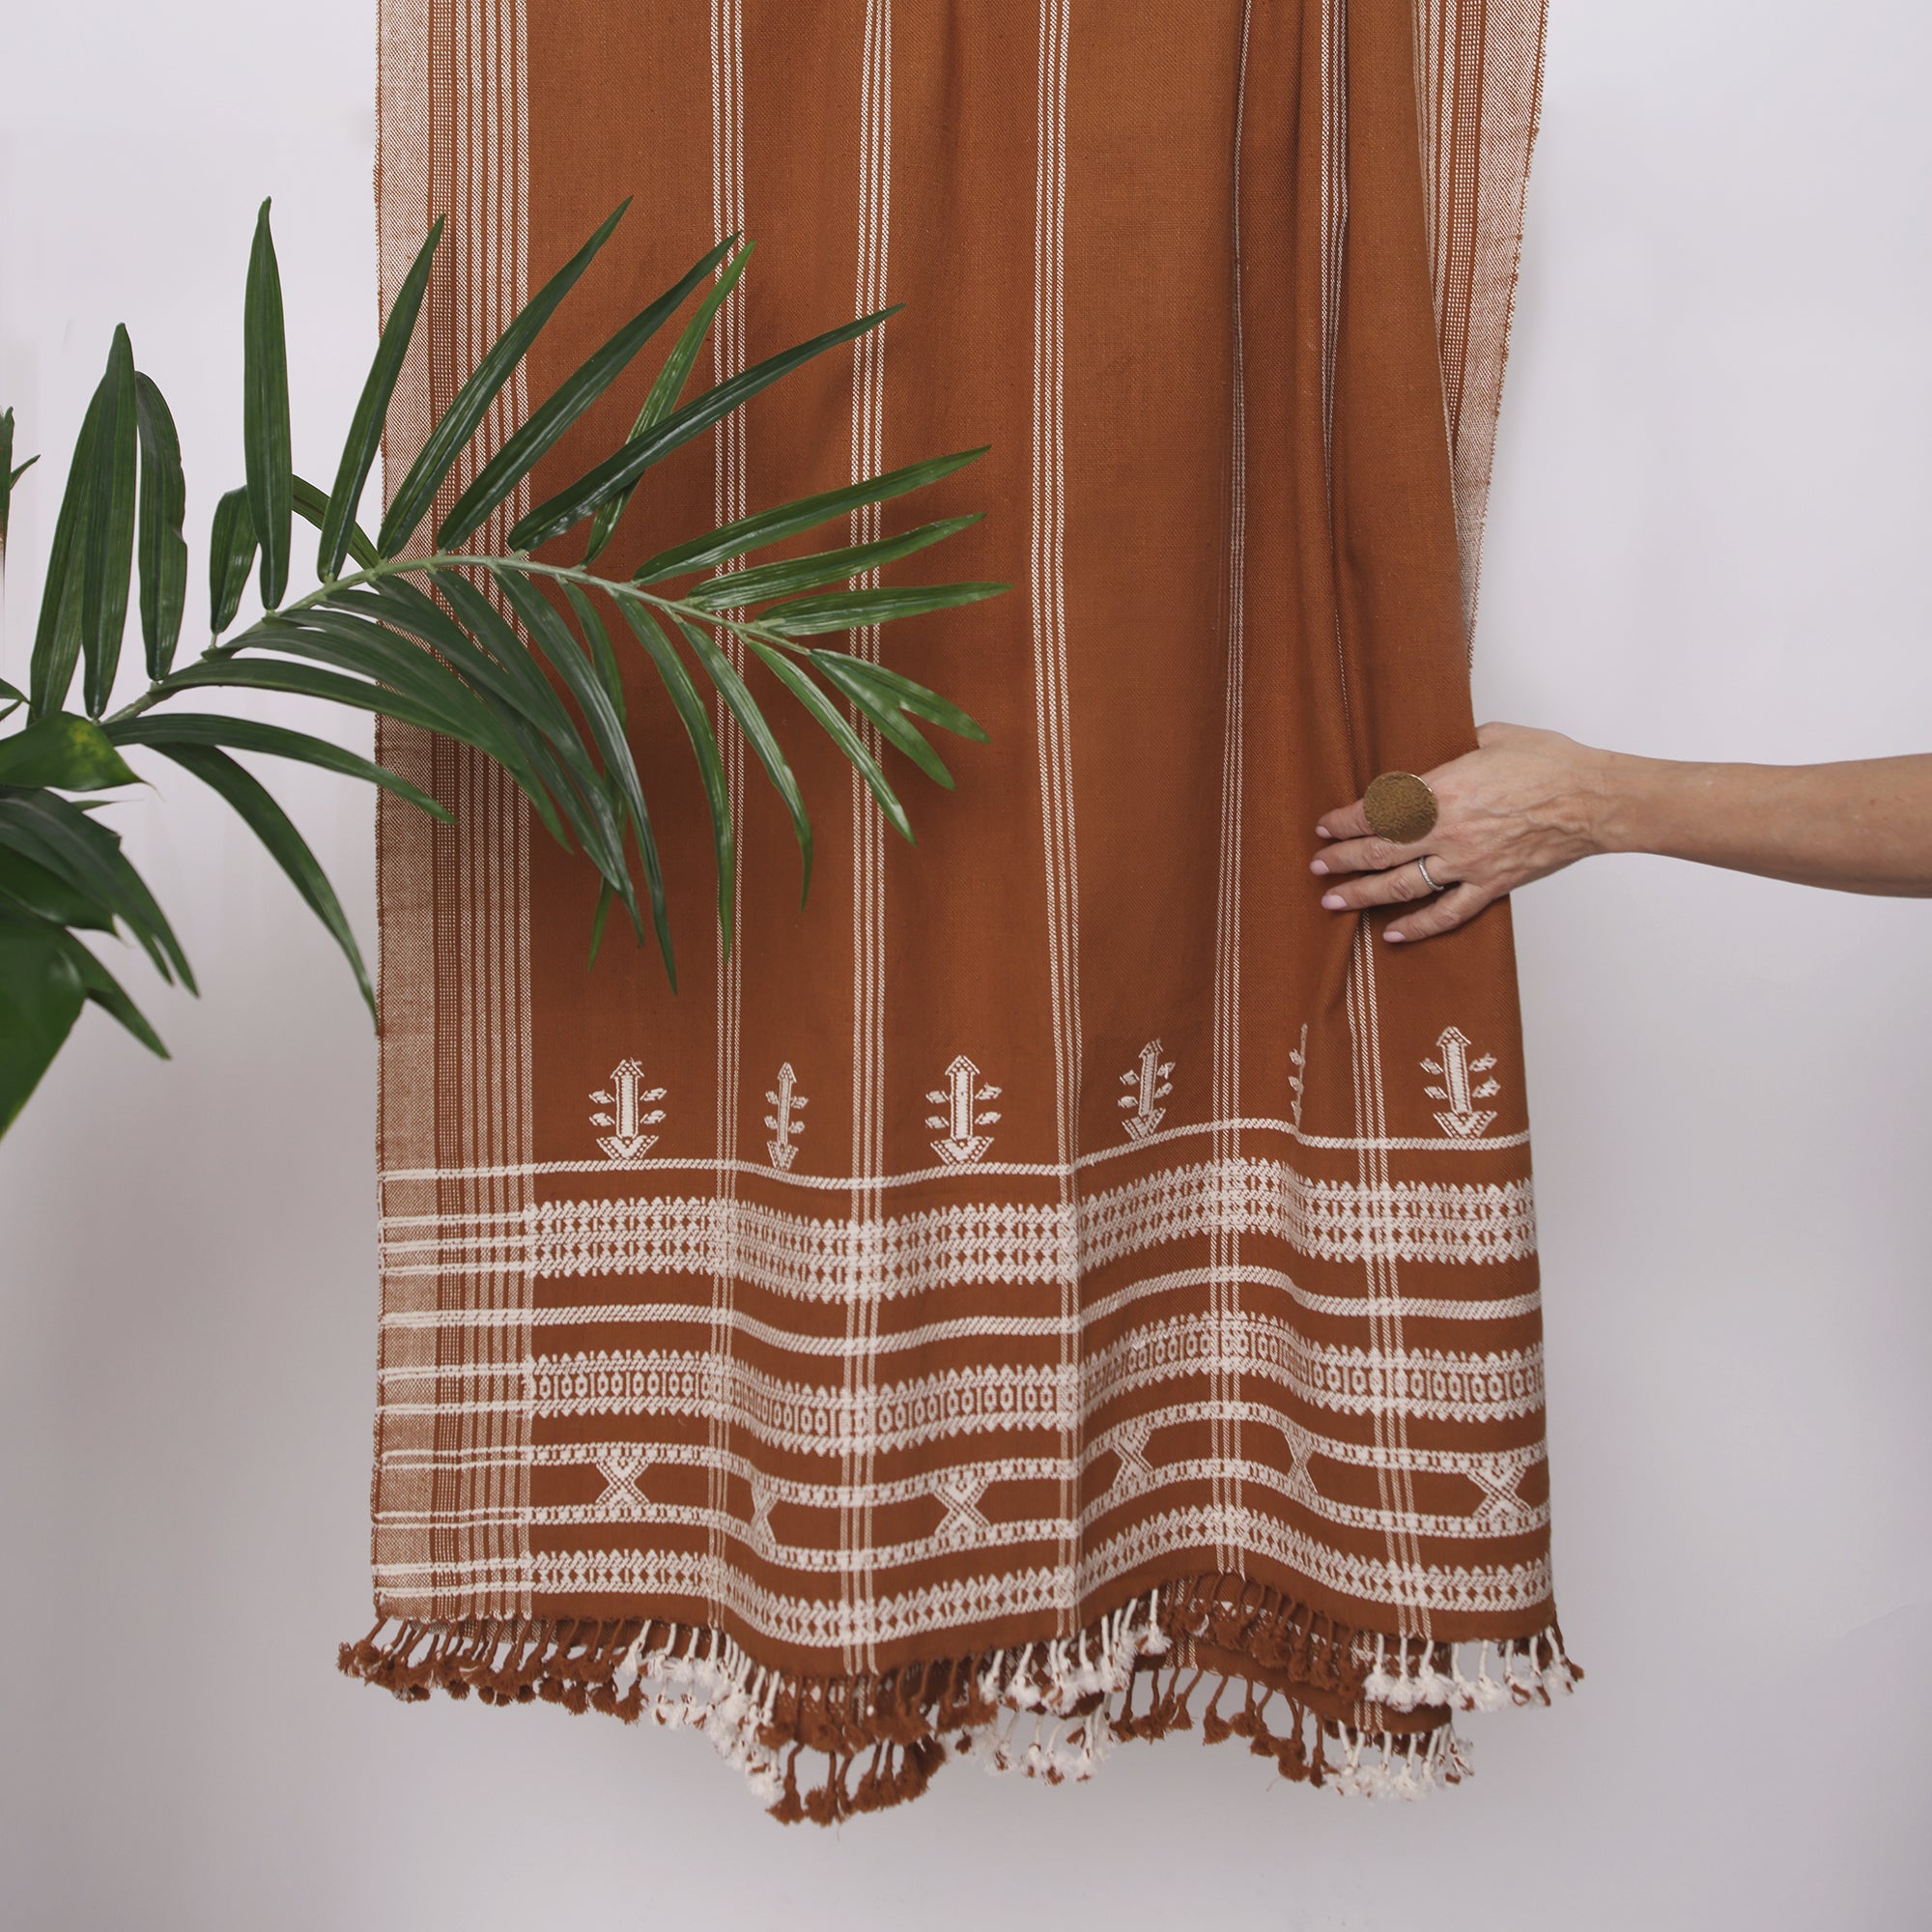 Woven Border Throw with Tassels